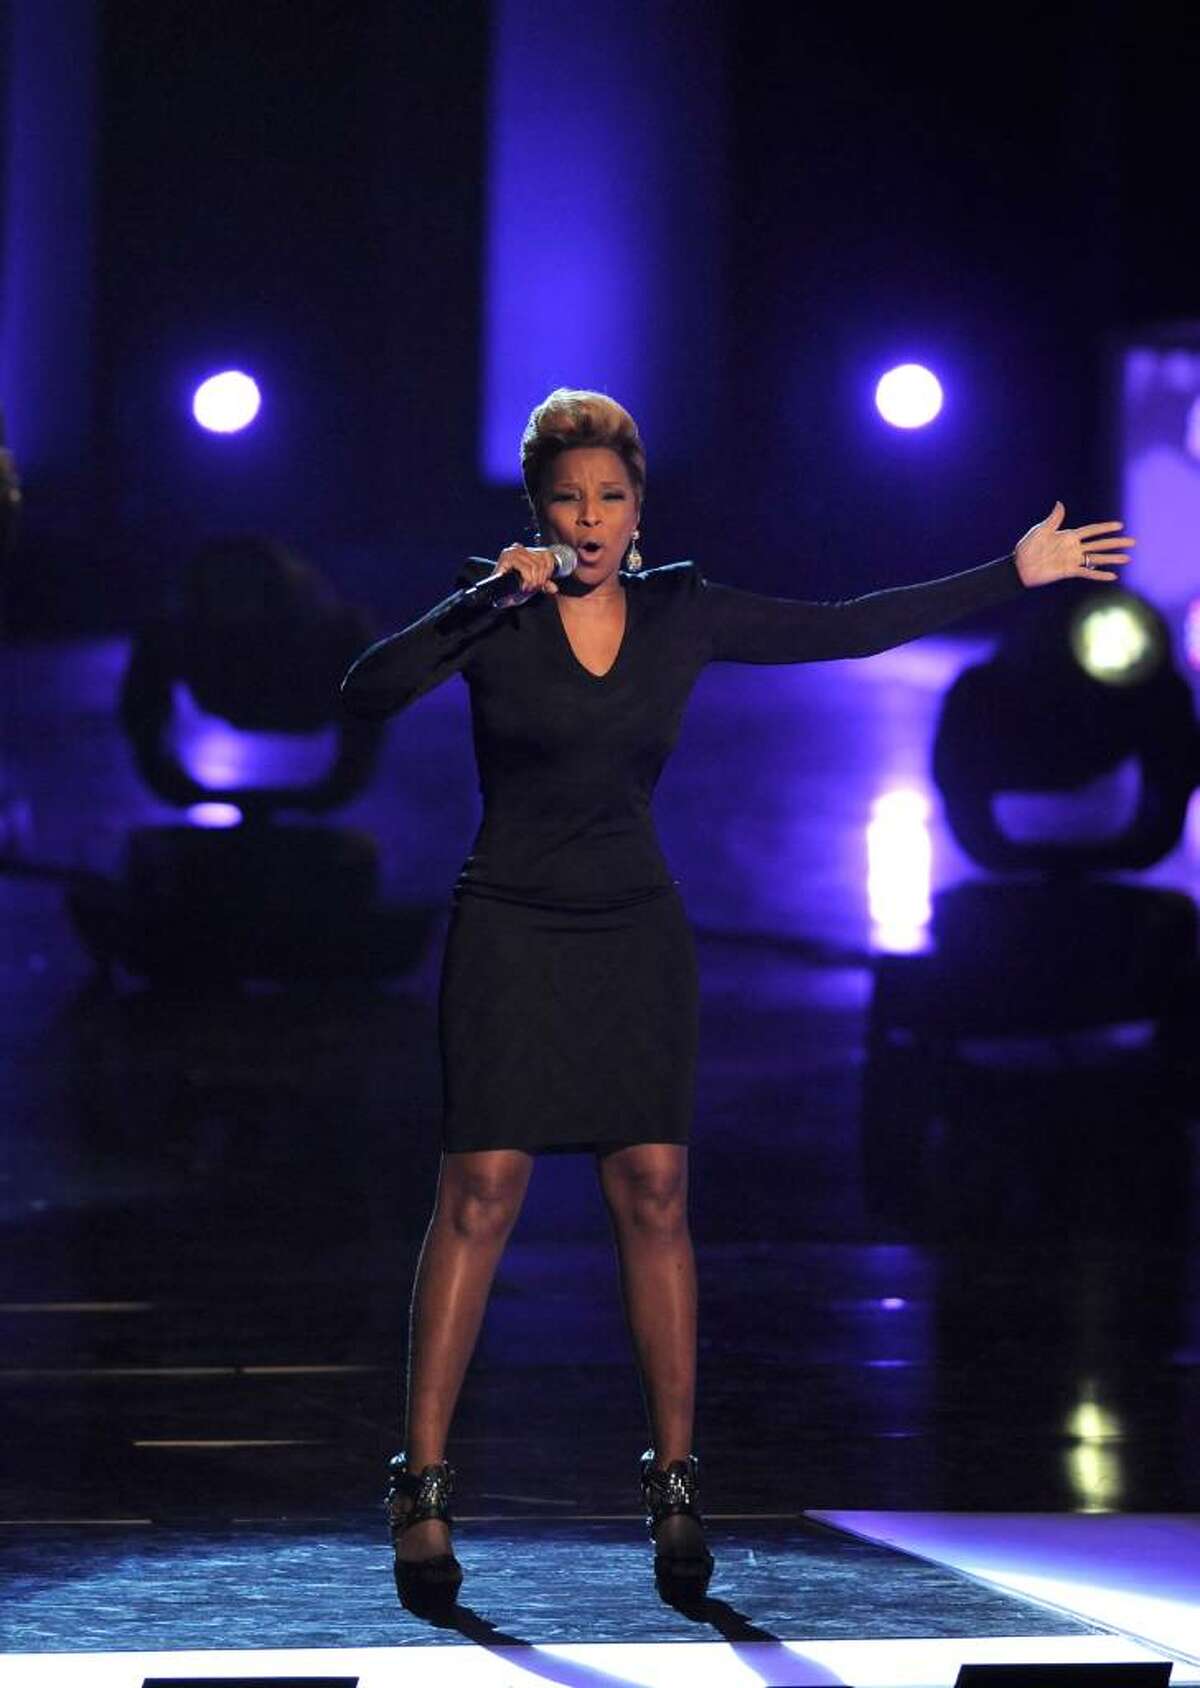 Mary J. Blige performs at the People's Choice Awards on Wednesday Jan. 6, 2010, in Los Angeles. (AP Photo/Chris Pizzello)